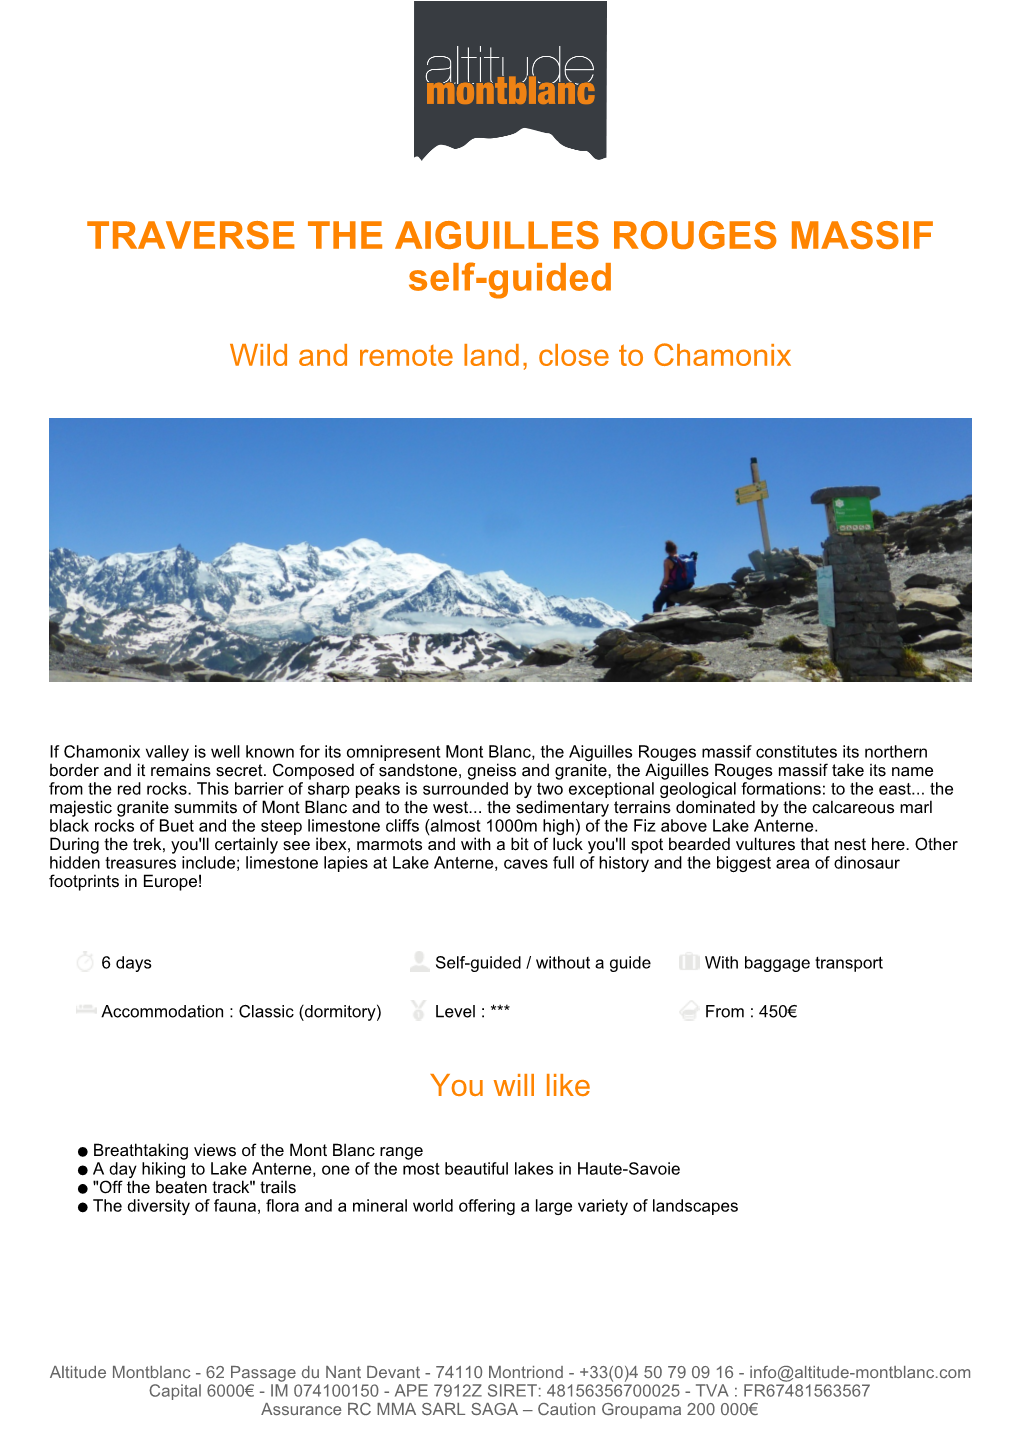 TRAVERSE the AIGUILLES ROUGES MASSIF Self-Guided